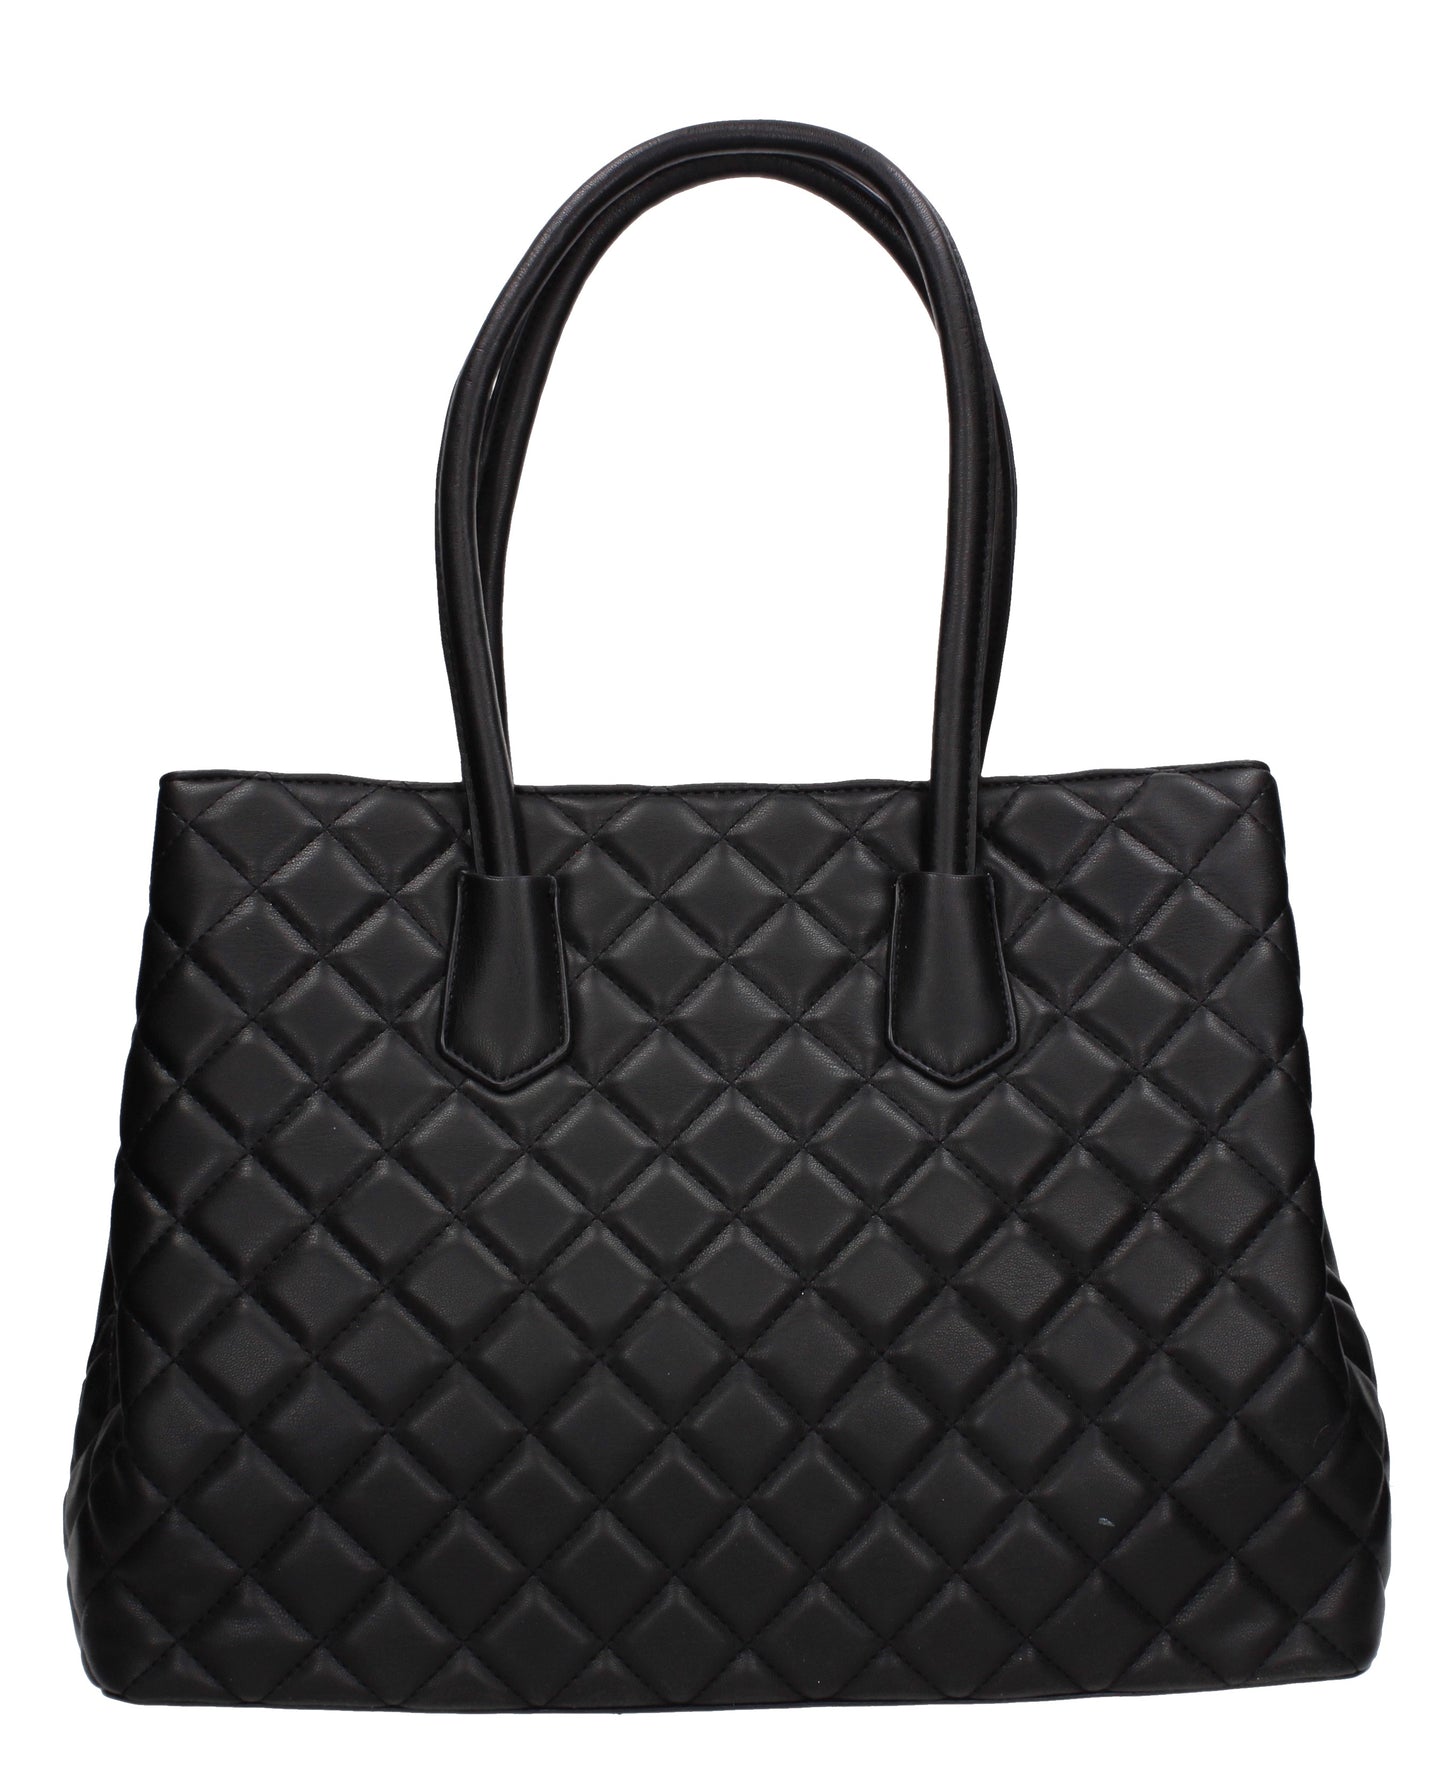 Buy your Valeria Handbag Black Today! Buy with confidence from Swankyswans